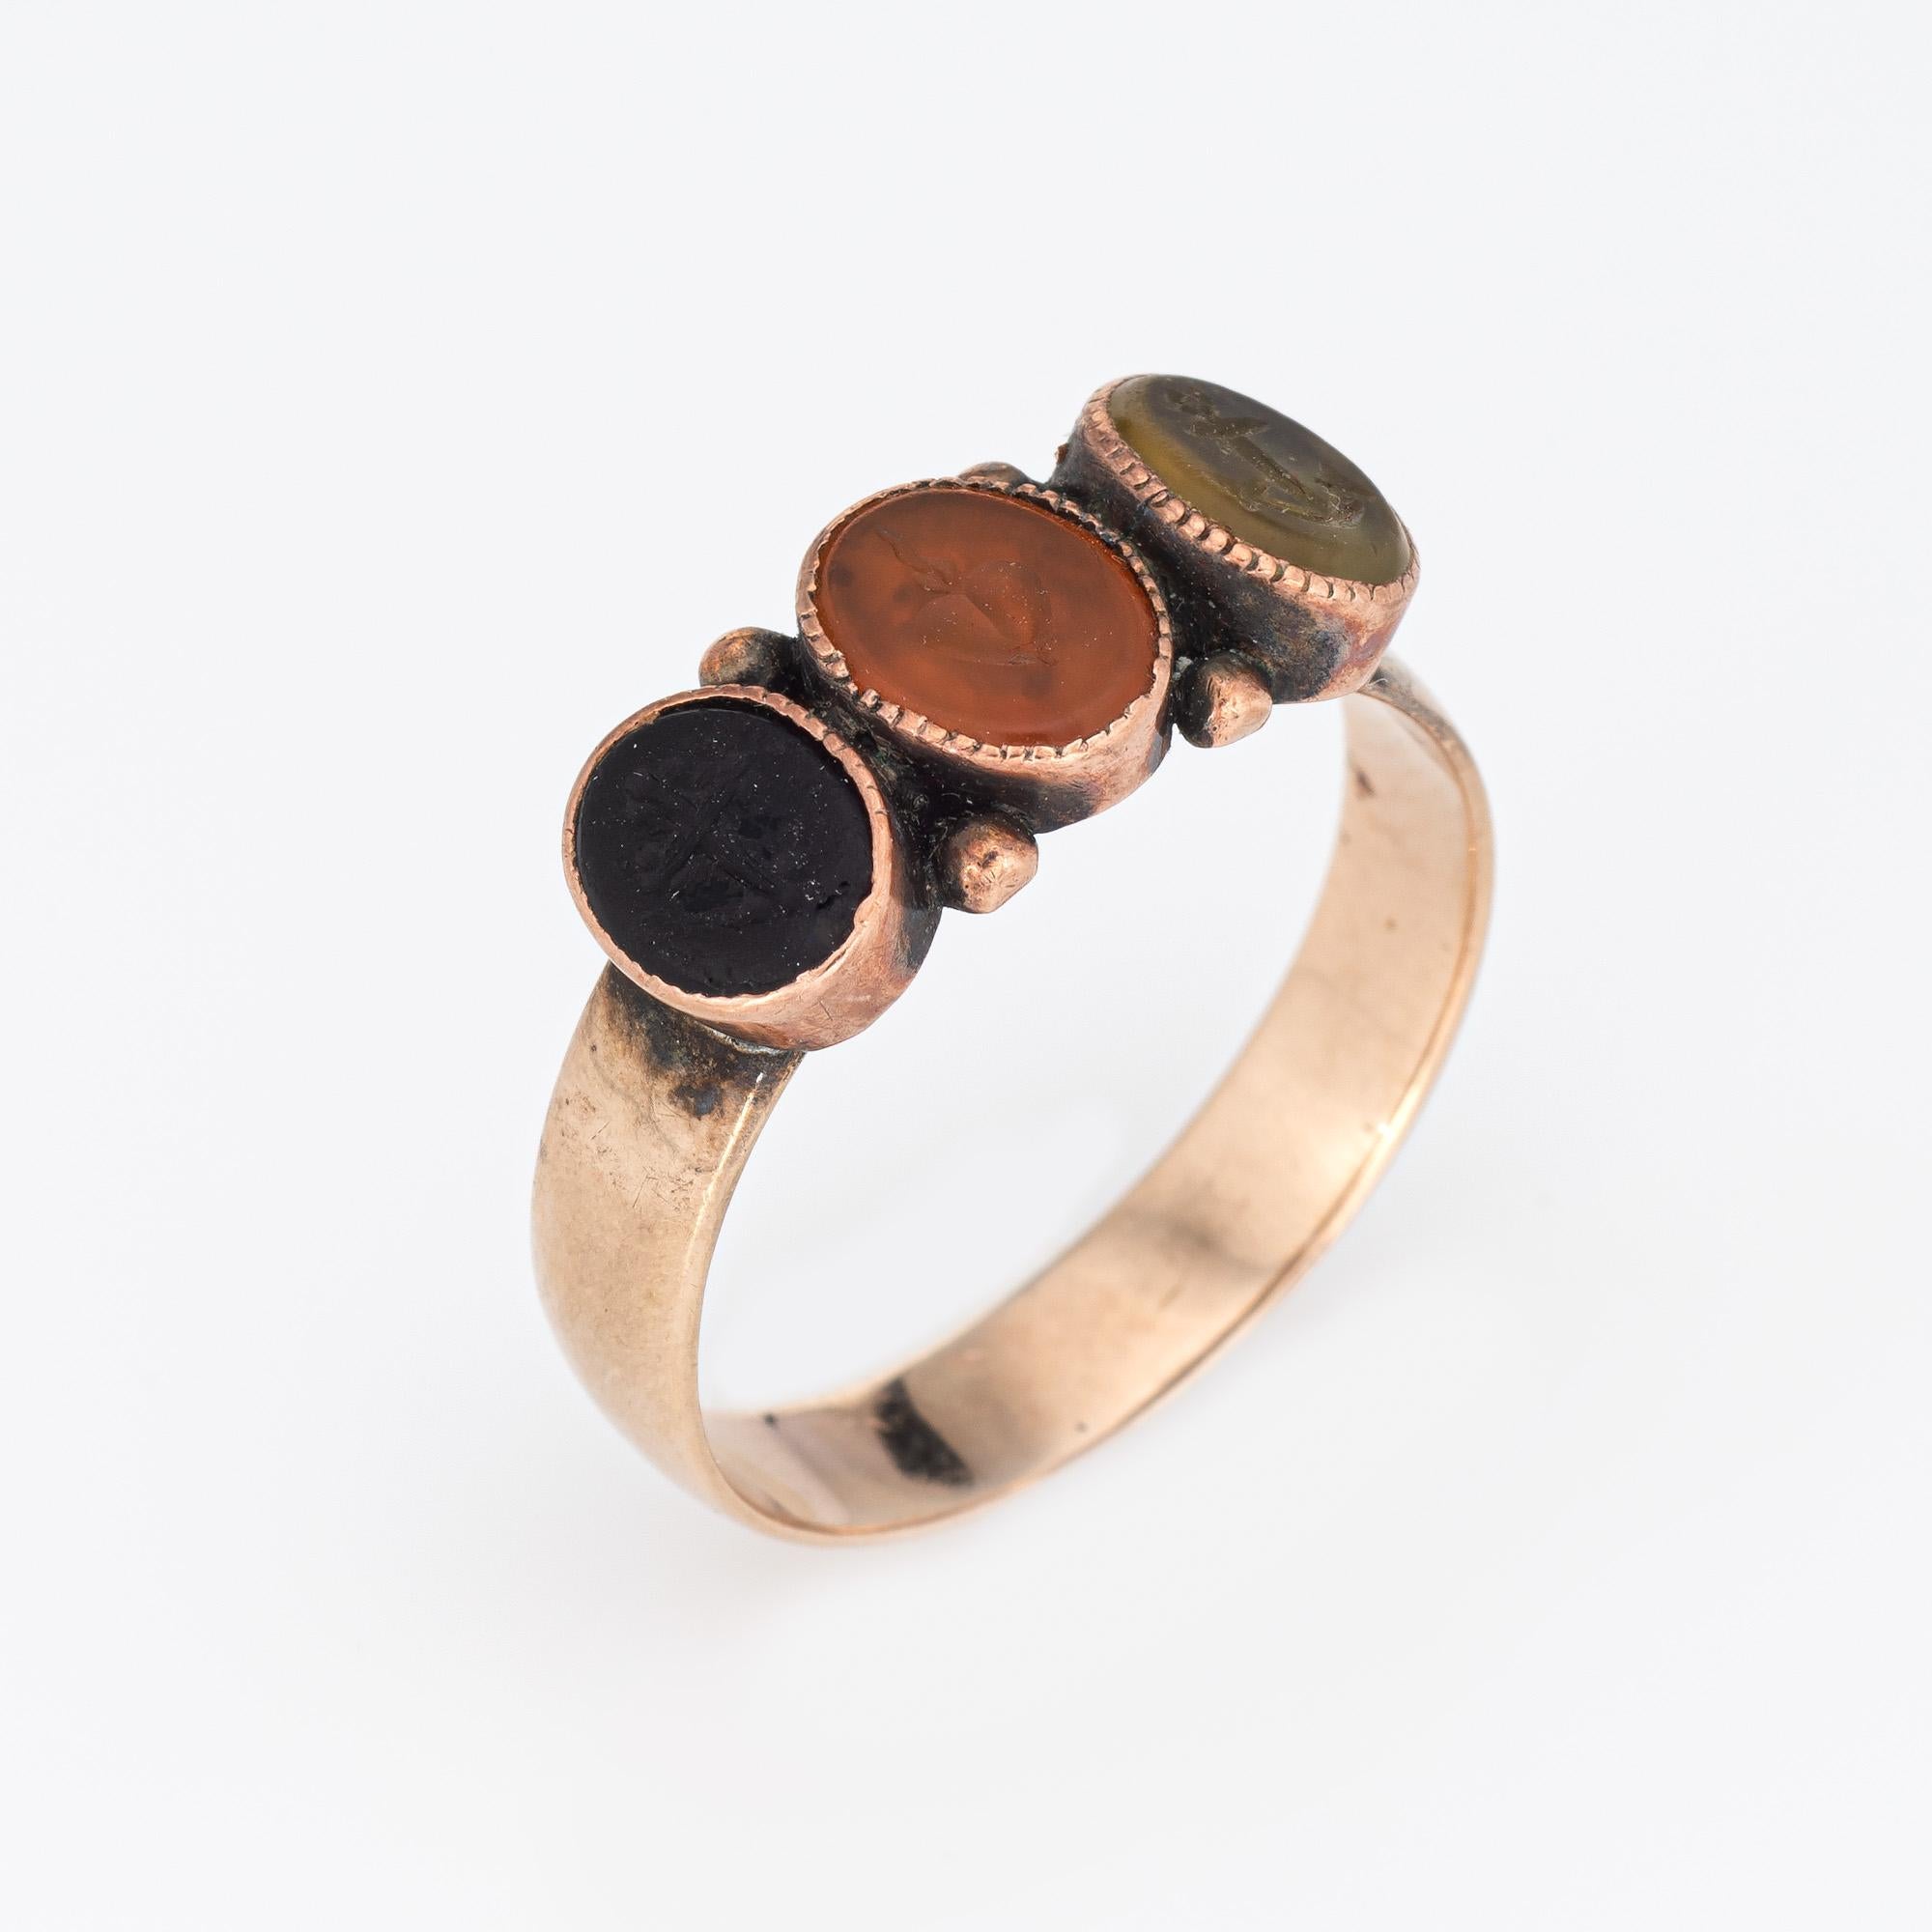 Finely detailed Victorian era 'Faith, Hope & Love' ring (circa 1880s to 1900s), crafted in 10 karat rose gold. 

Black, orange and green stones measure 6mm x 5mm. The stones are in good condition with wear evident under a 10x loupe. 

Faith is